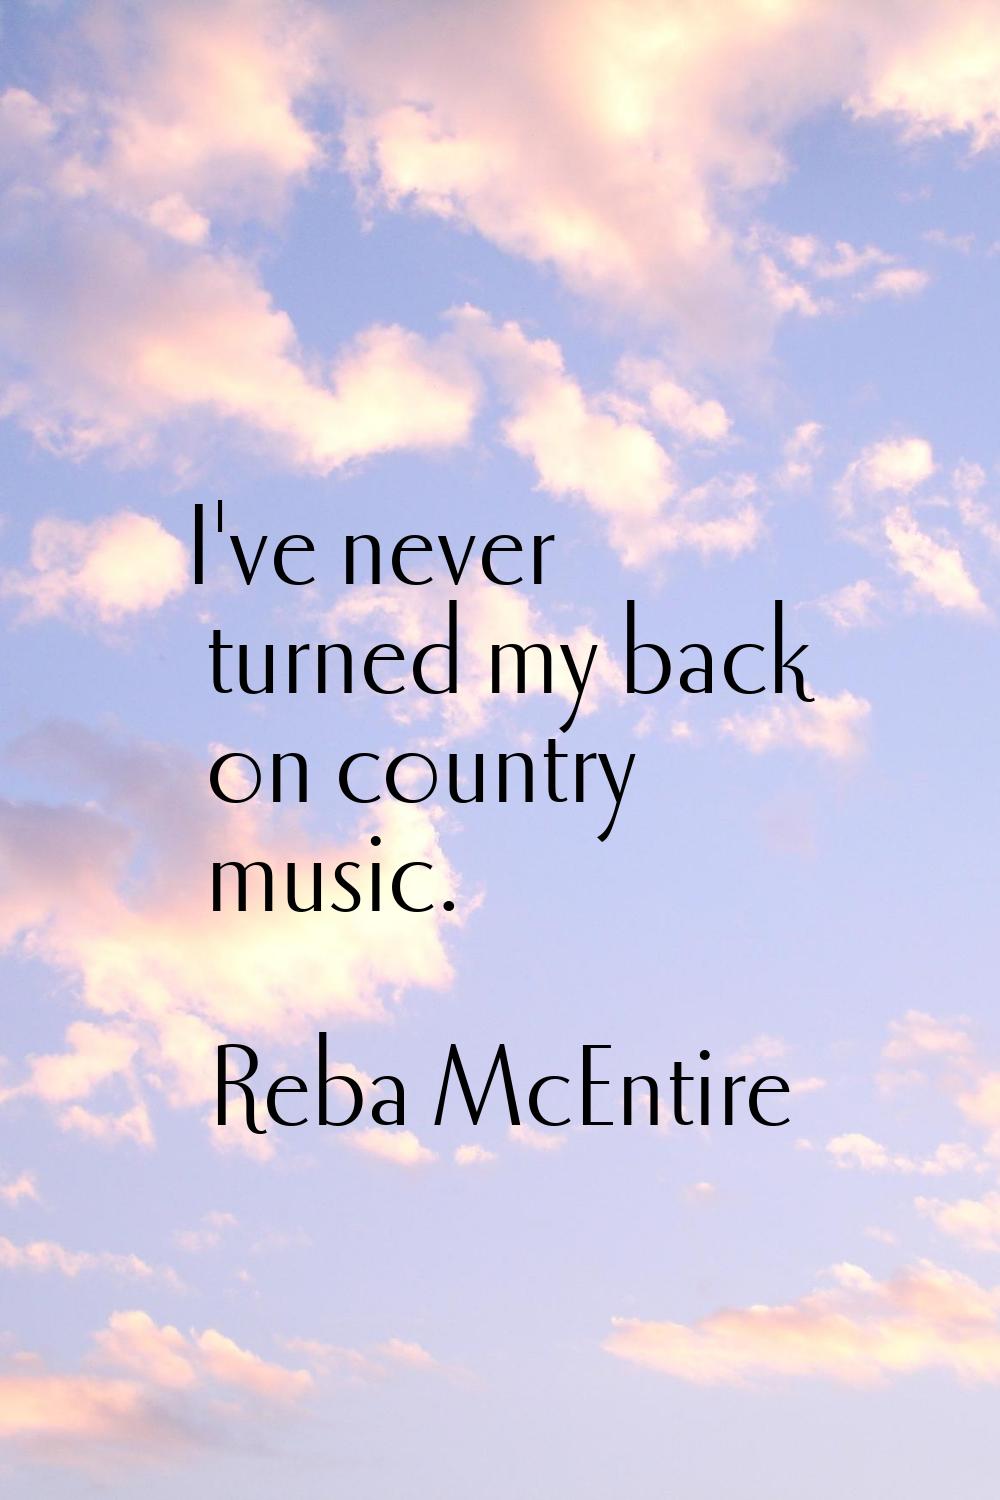 I've never turned my back on country music.